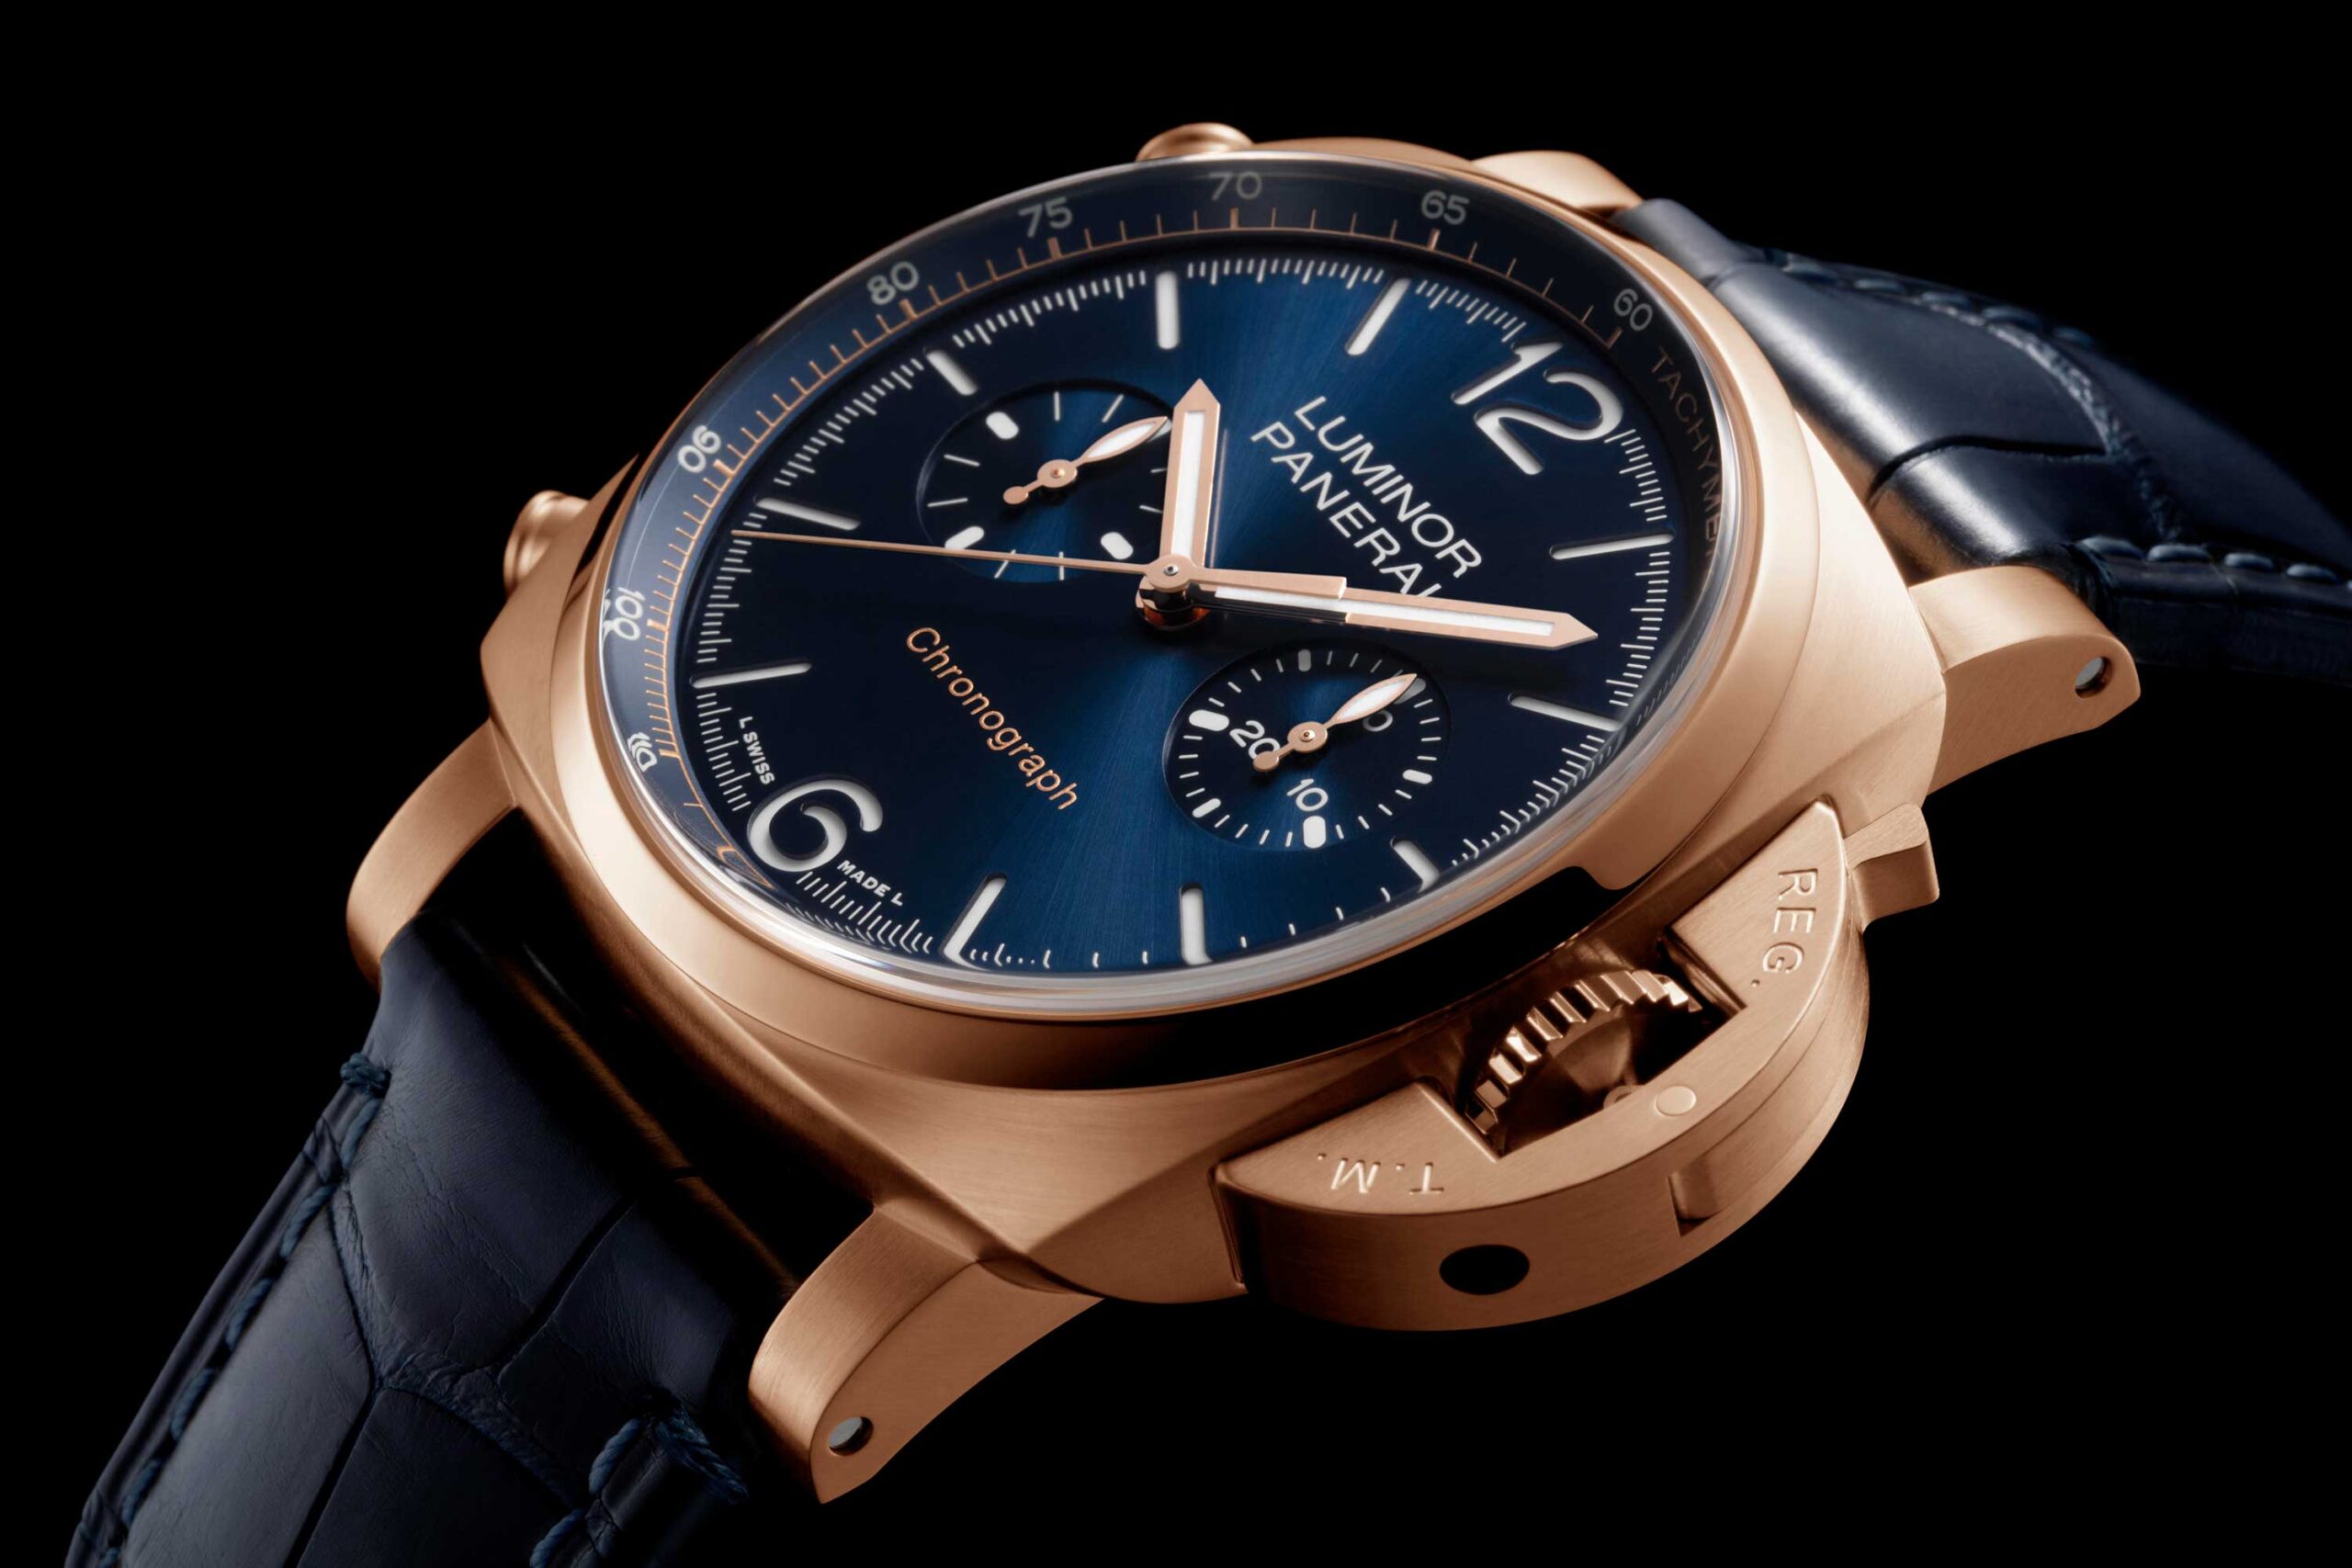 The Goldtech case and the deep-blue sunray finished dial add warmth to this new technical Luminor chronograph.